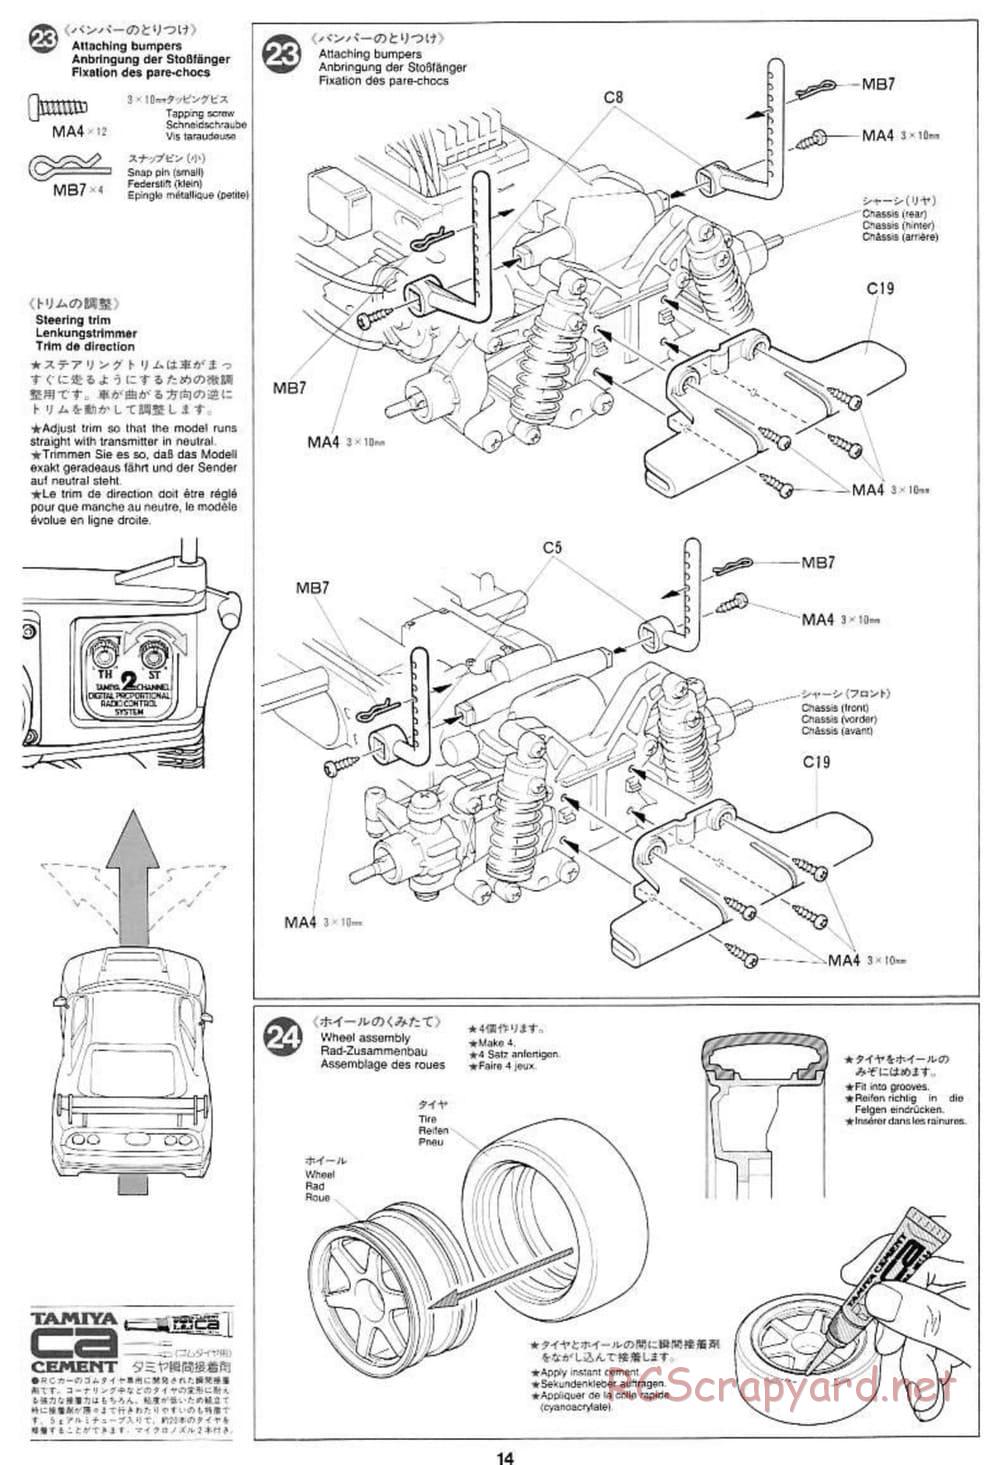 Tamiya - Pennzoil Nismo GT-R - TL-01 Chassis - Manual - Page 14